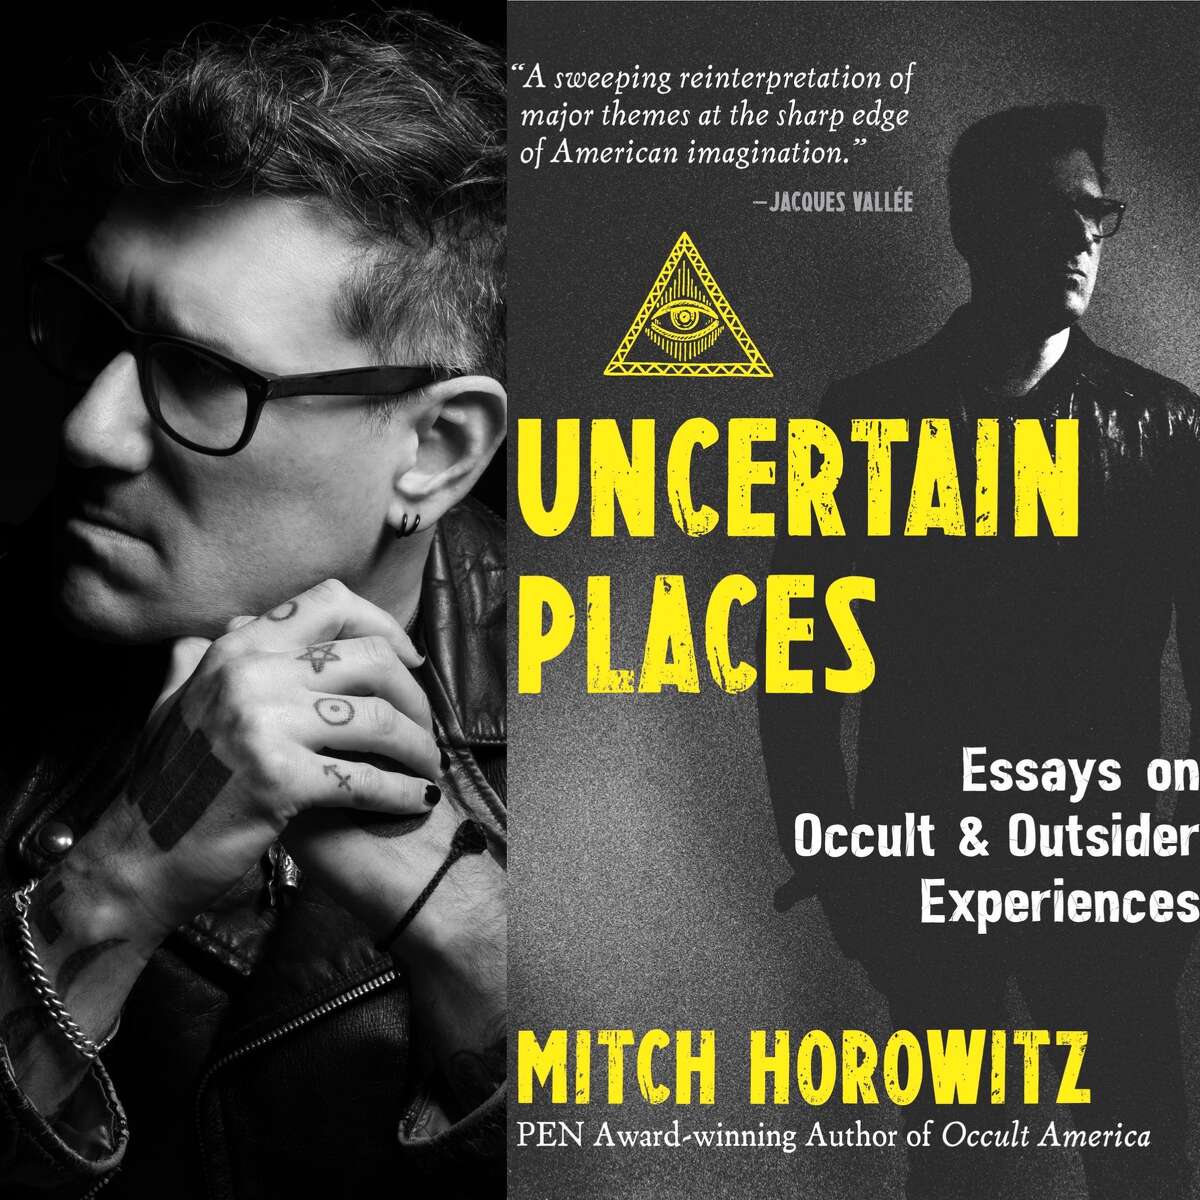 Mitch Horowitz’s forthcoming collection of essays explores America’s interest in the numinous, mysterious and uncertain, from secret societies and modern occultism to David Lynch and out-of-body experiences.